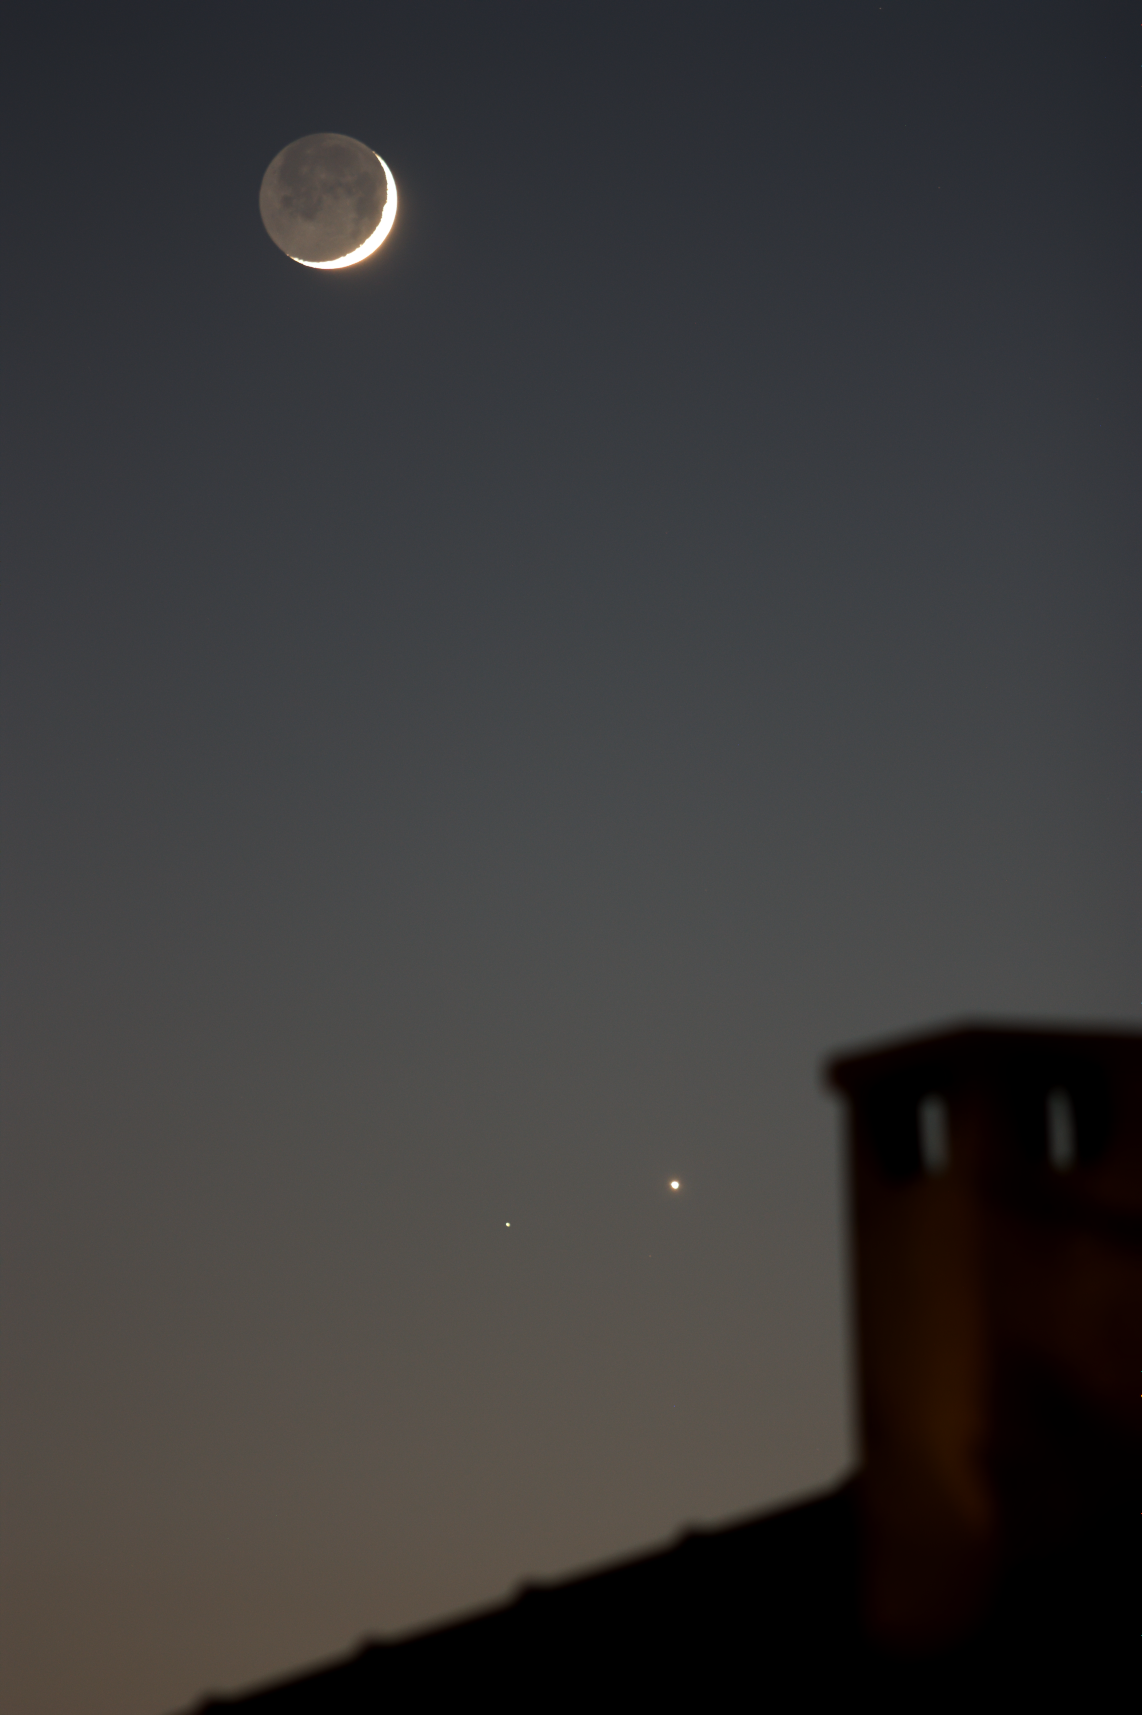 Venus & Mars Conjunction & The Crescent Moon July 2021 Big, Macho Venus, Goddess Of Love, And Wimpy Little Mars, God Of War, Are At Their Closest Together, About ½° Apart, Low In The West-northwest In Twilight. This Evening The Crescent Moon Shine